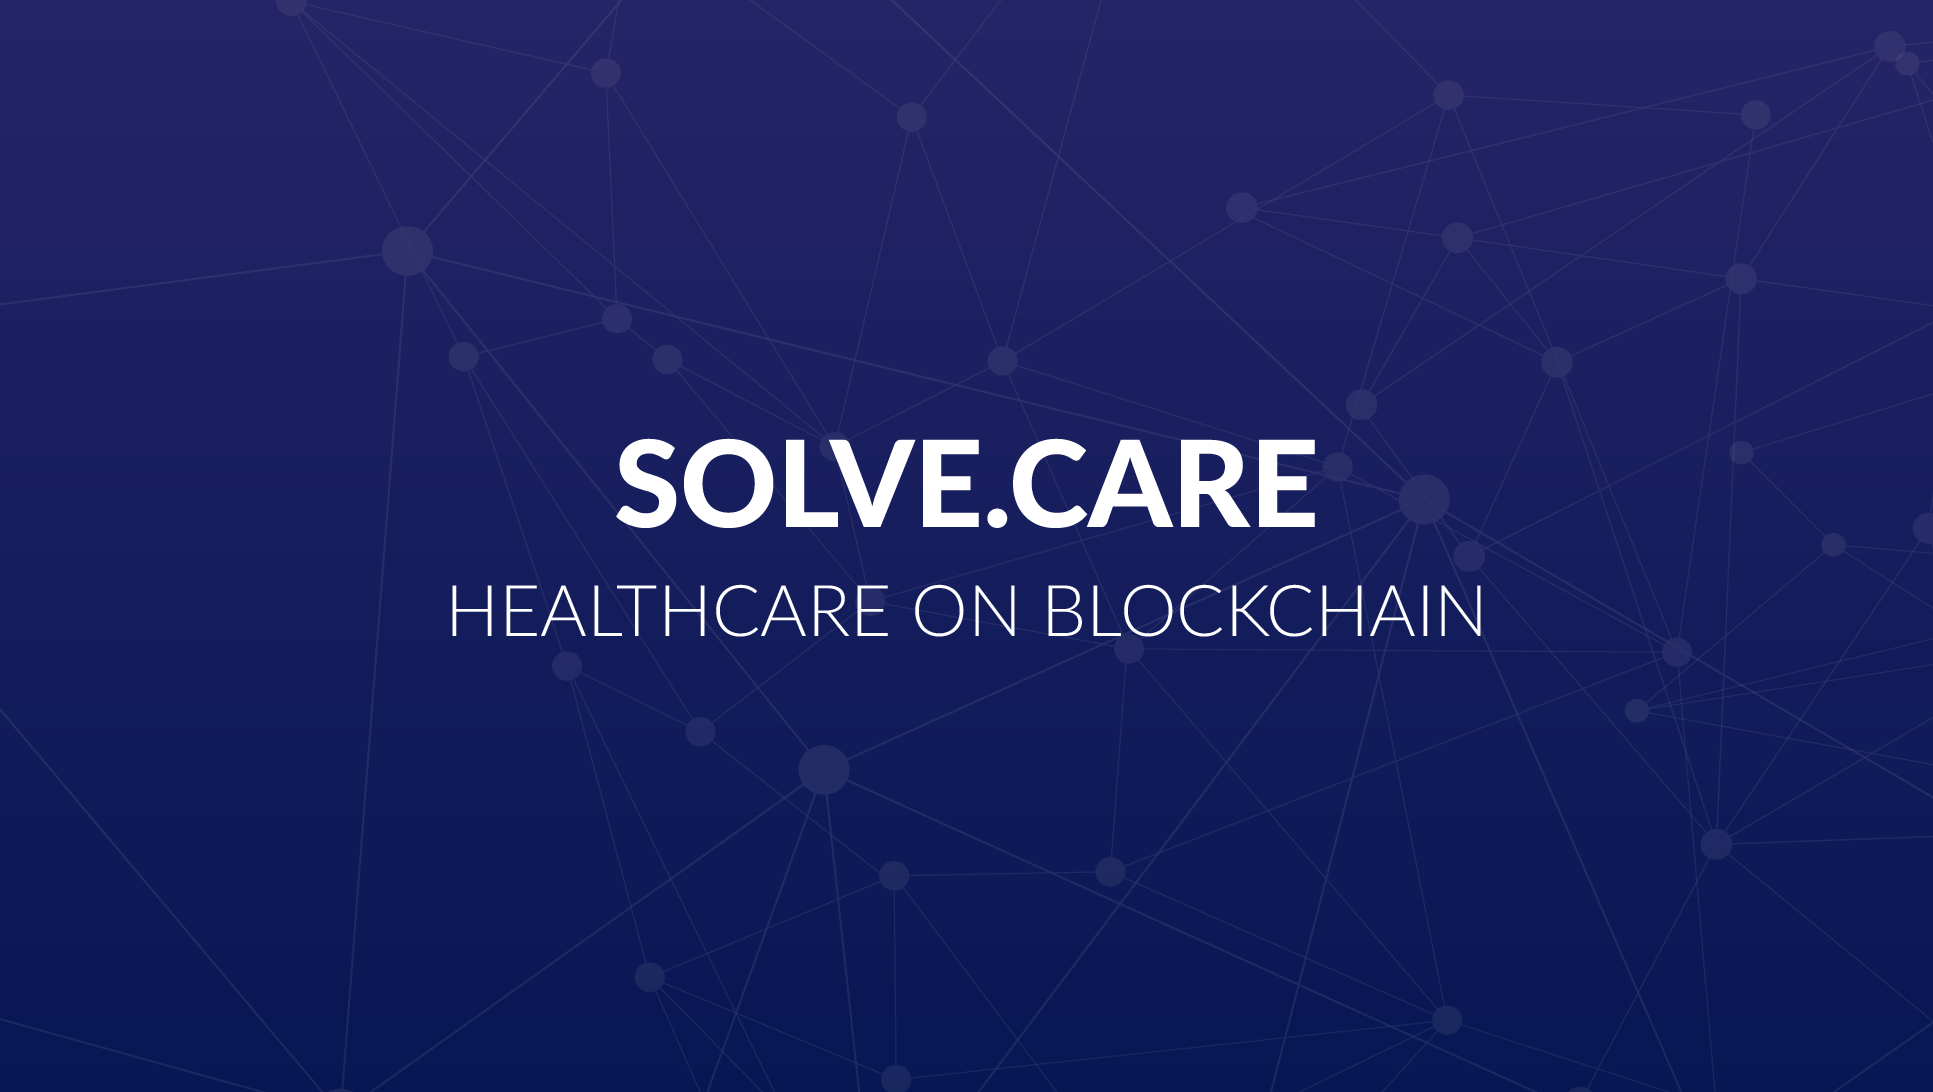 Leading Healthcare Tech firm HMS teams up with Blockchain startup Solve.Care